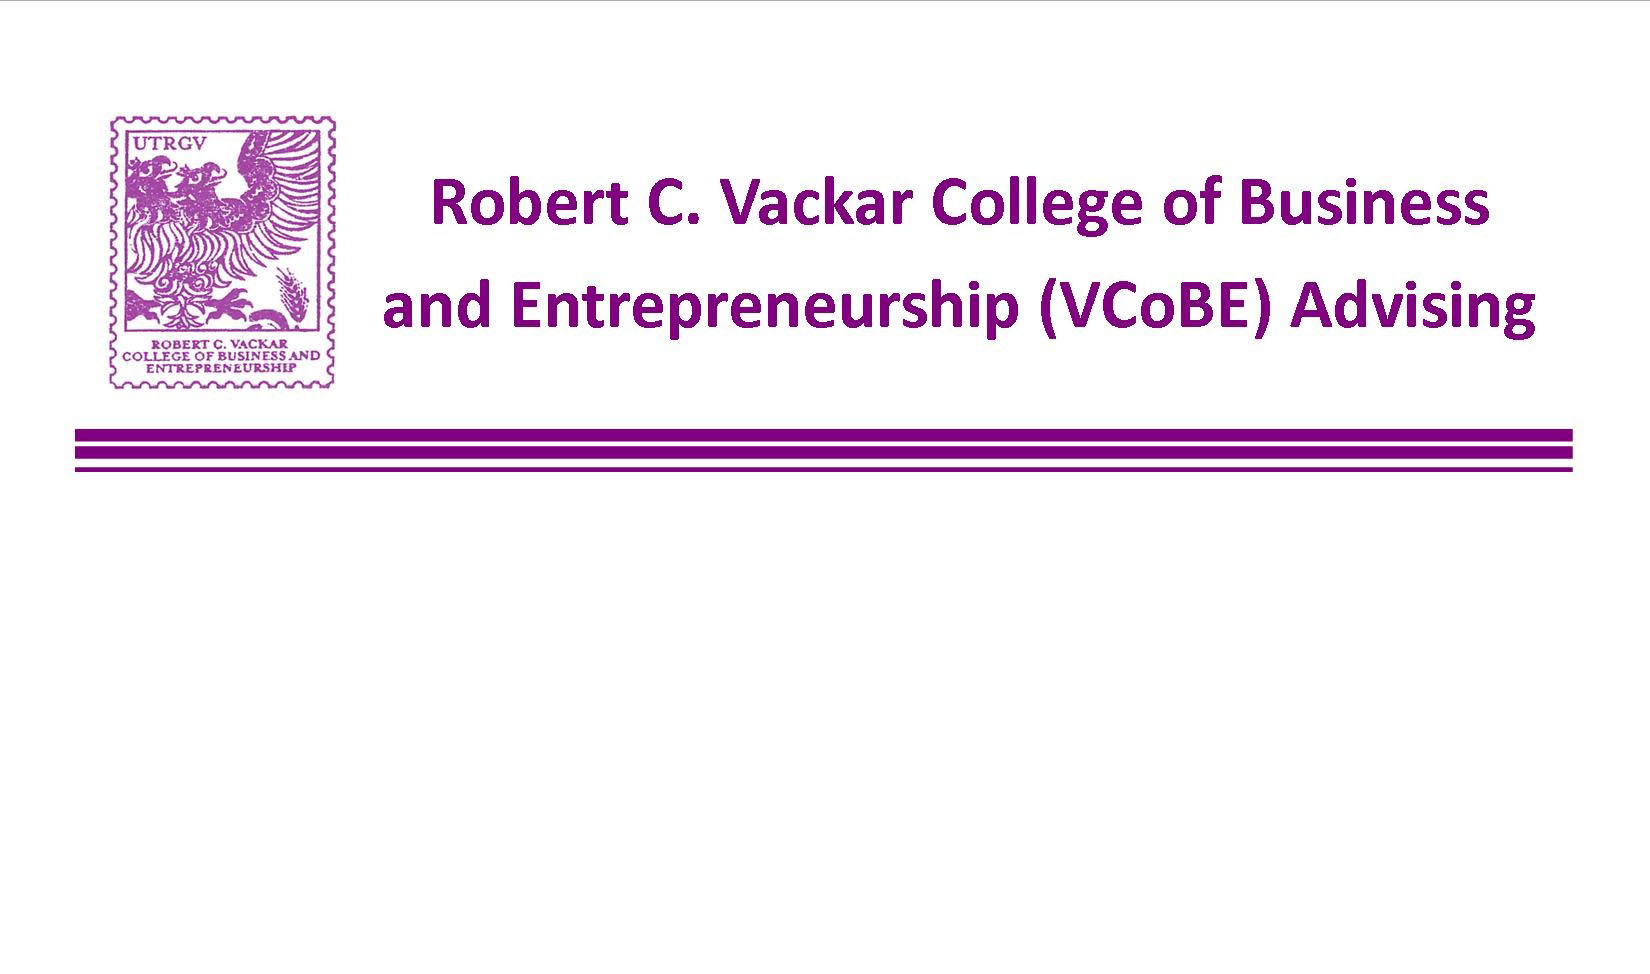 Do you have Questions regarding your degree plan? Check out the Robert C Vackar College of Business and Entrepreneurship (VCoBE) Advising